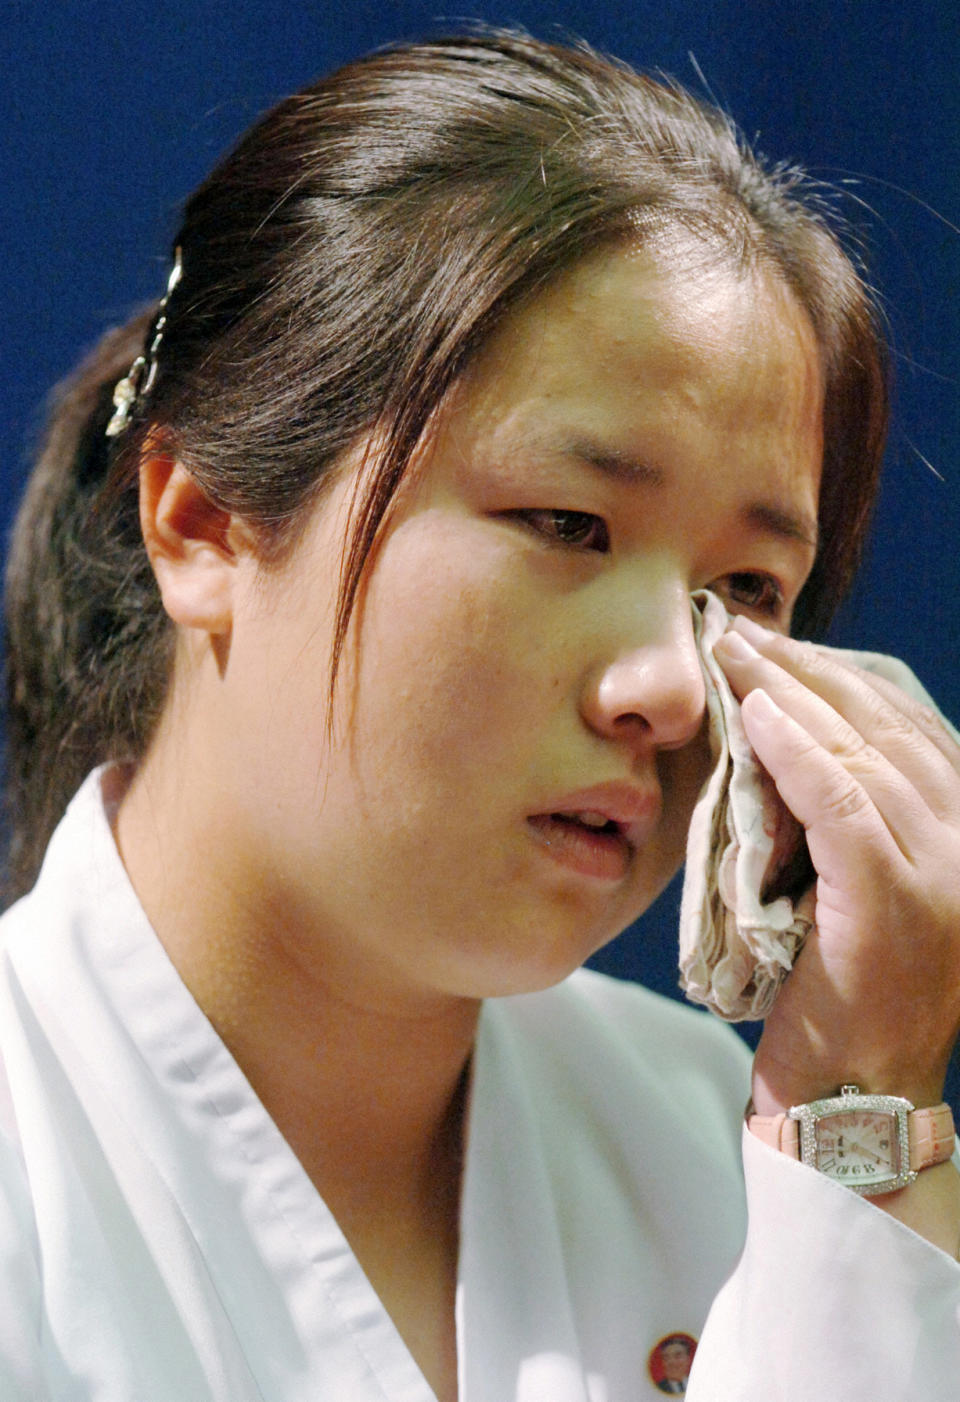 FILE - In this July 6, 2006 file photo, Kim Un Kyong, who's Japanese mother Megumi Yokota was adducted by North Korea in 1977, is moved to tears while speaking about her Japanese grandparents, Shigeru and Sakie Yokota, during a press conference at a hotel in Pyongyang, North Korea. Japan's Foreign Ministry confirmed Sunday, March 16, 2014, that Shigeru Yokota and his wife Sakie spent spent time with their Korean-born granddaughter Kim, for the first time over several days last week in Ulan Bator, Mongolia. Kim is 26 years old, Japanese media said. (AP Photo/Kyodo News, File) JAPAN OUT, MANDATORY CREDIT